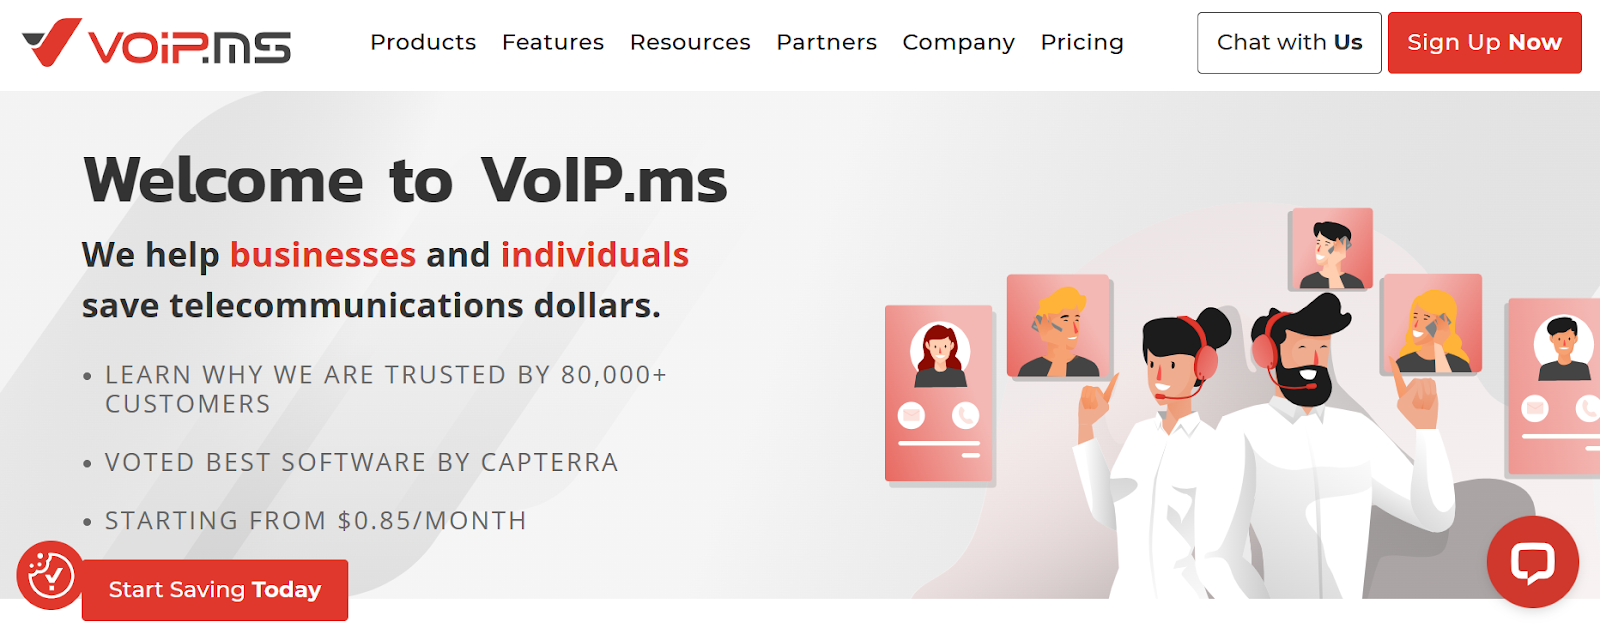 VoIP.ms website snapshot highlighting the services it offers.